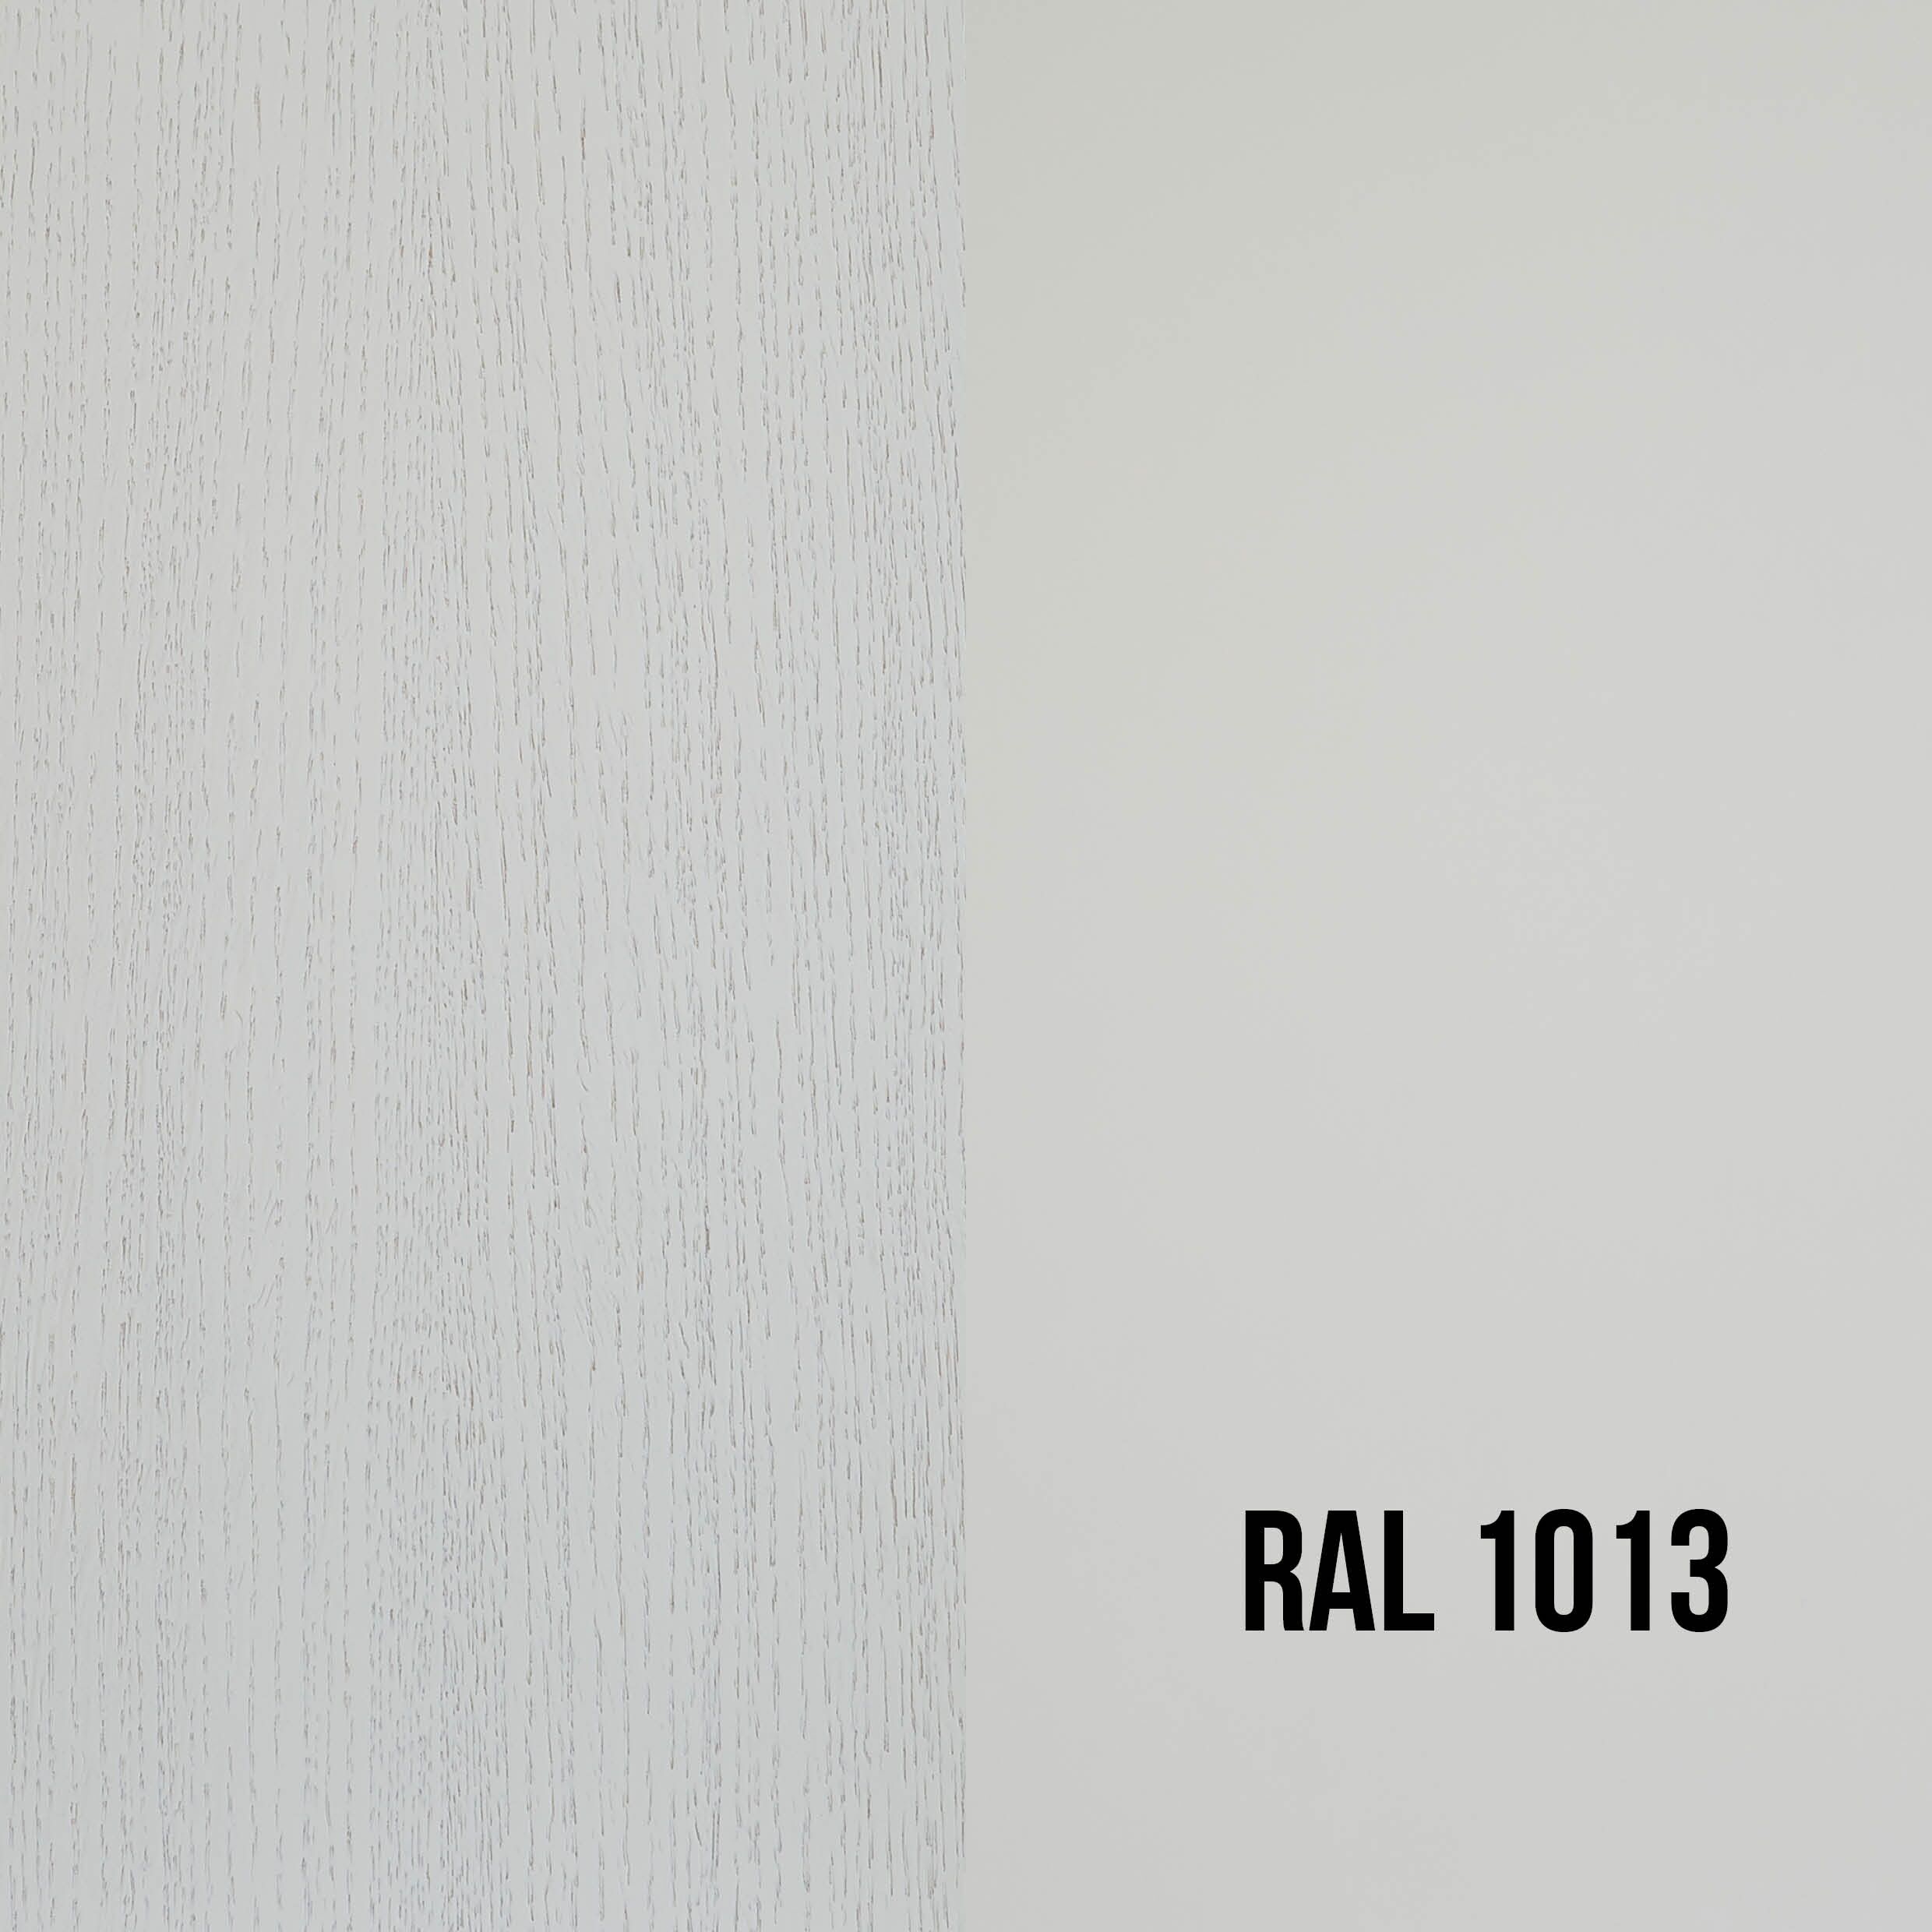 RAL 1013